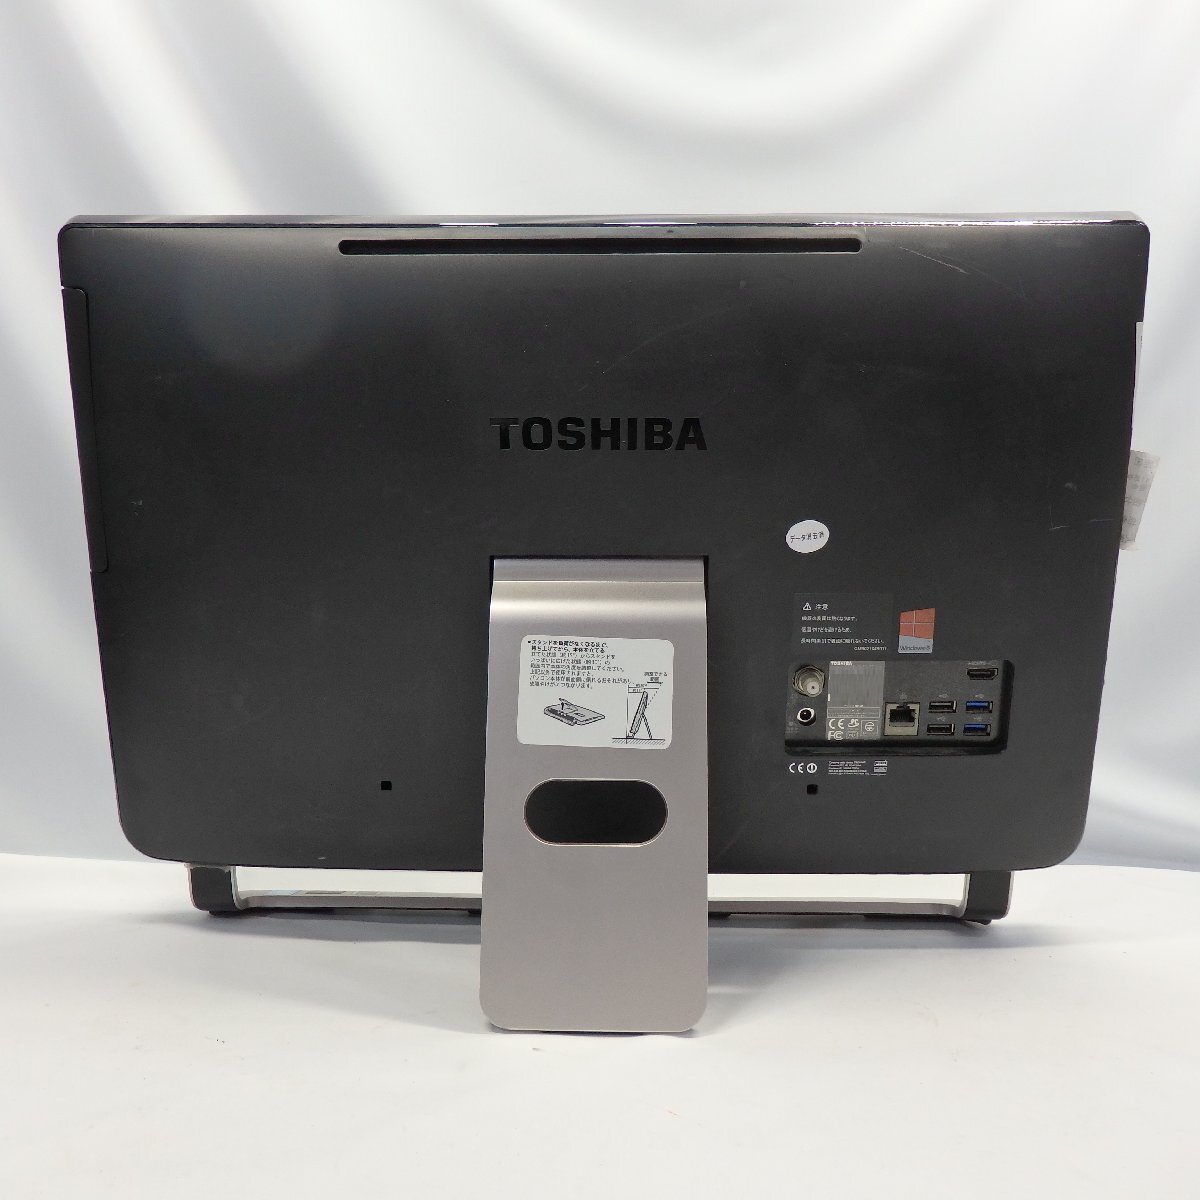 TOSHIBA DynaBook REGZA PC D71/T7MB Core i7-4710MQ 2.5GHz/8GB/HDD3TB/Blu-ray/21 -inch /OS less / operation not yet verification /AC less [ including in a package un- possible ]